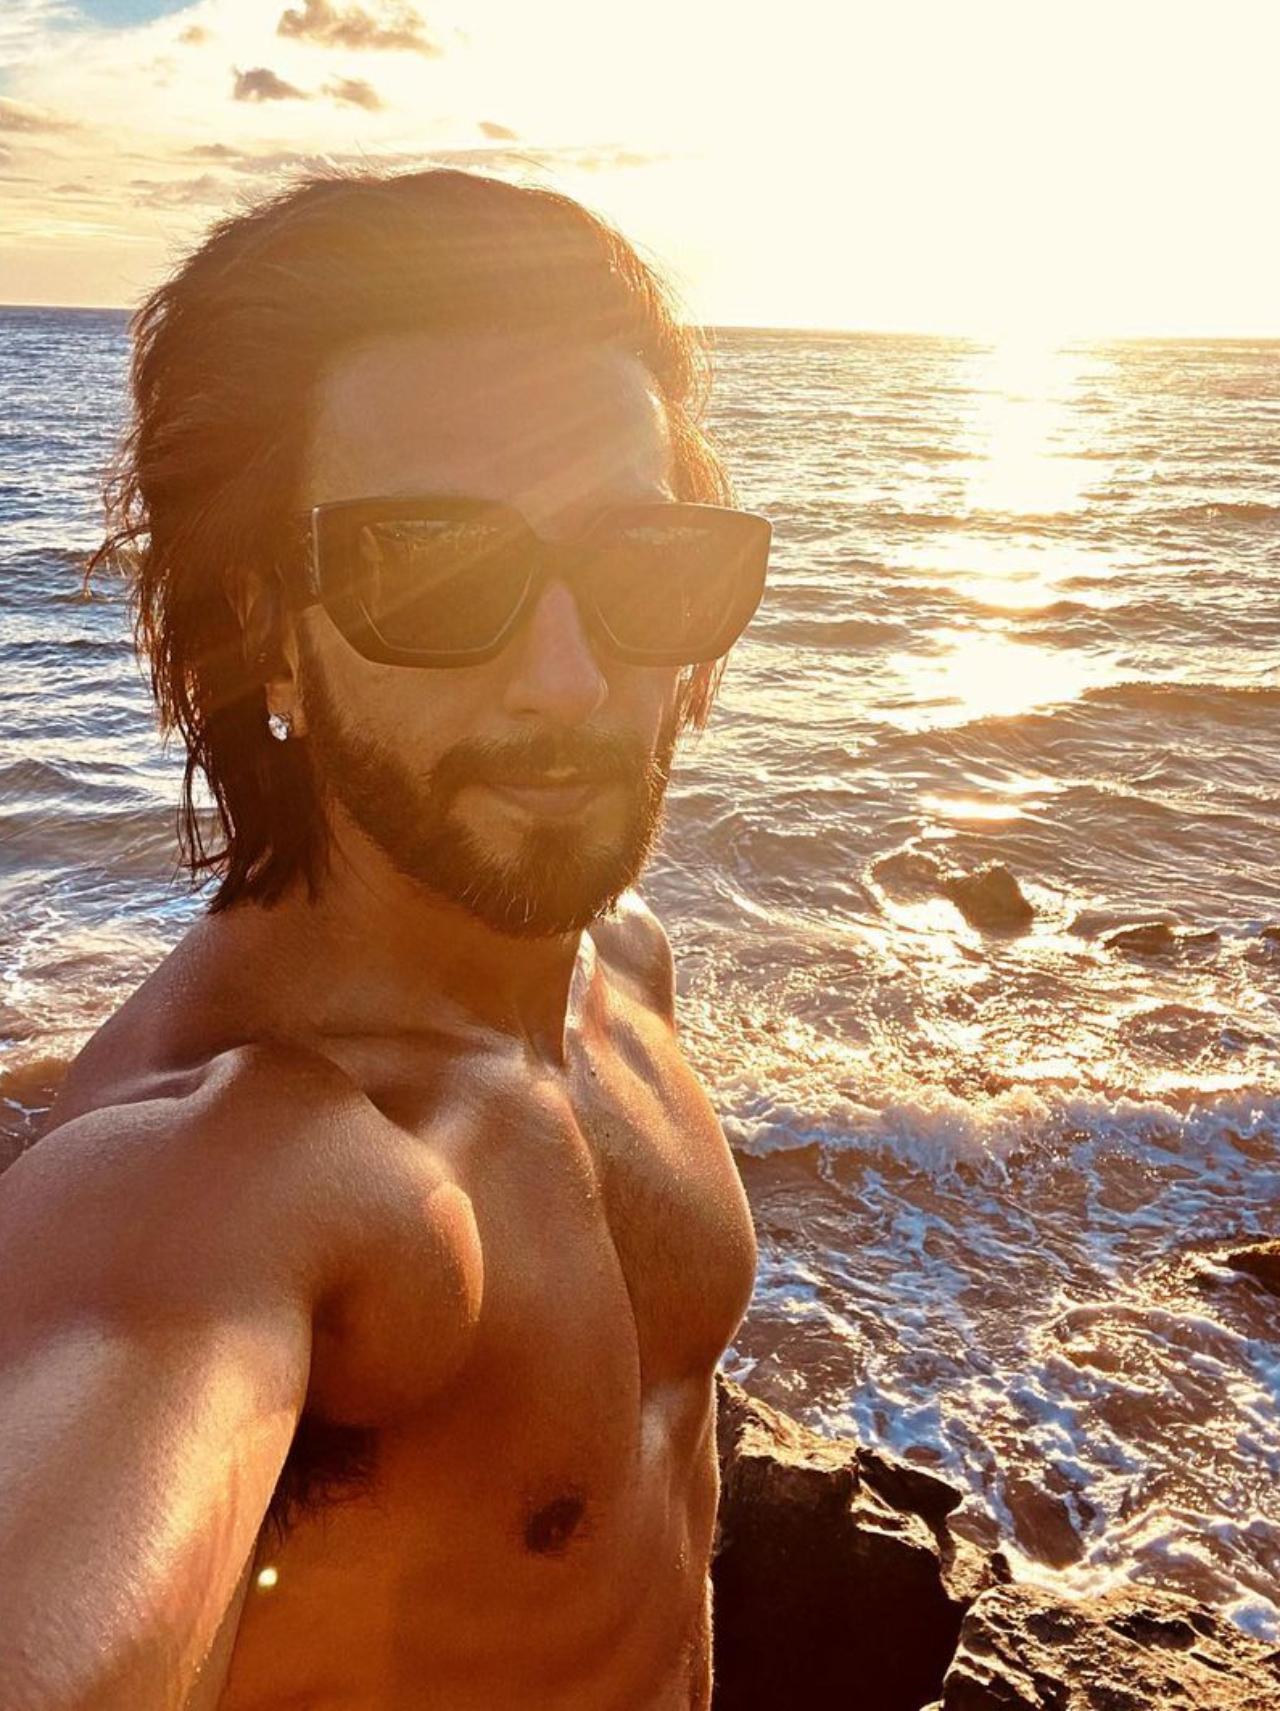 The 'Bajirao Mastani' star also shared a shirtless picture of himself clicked at a beach in the USA. 